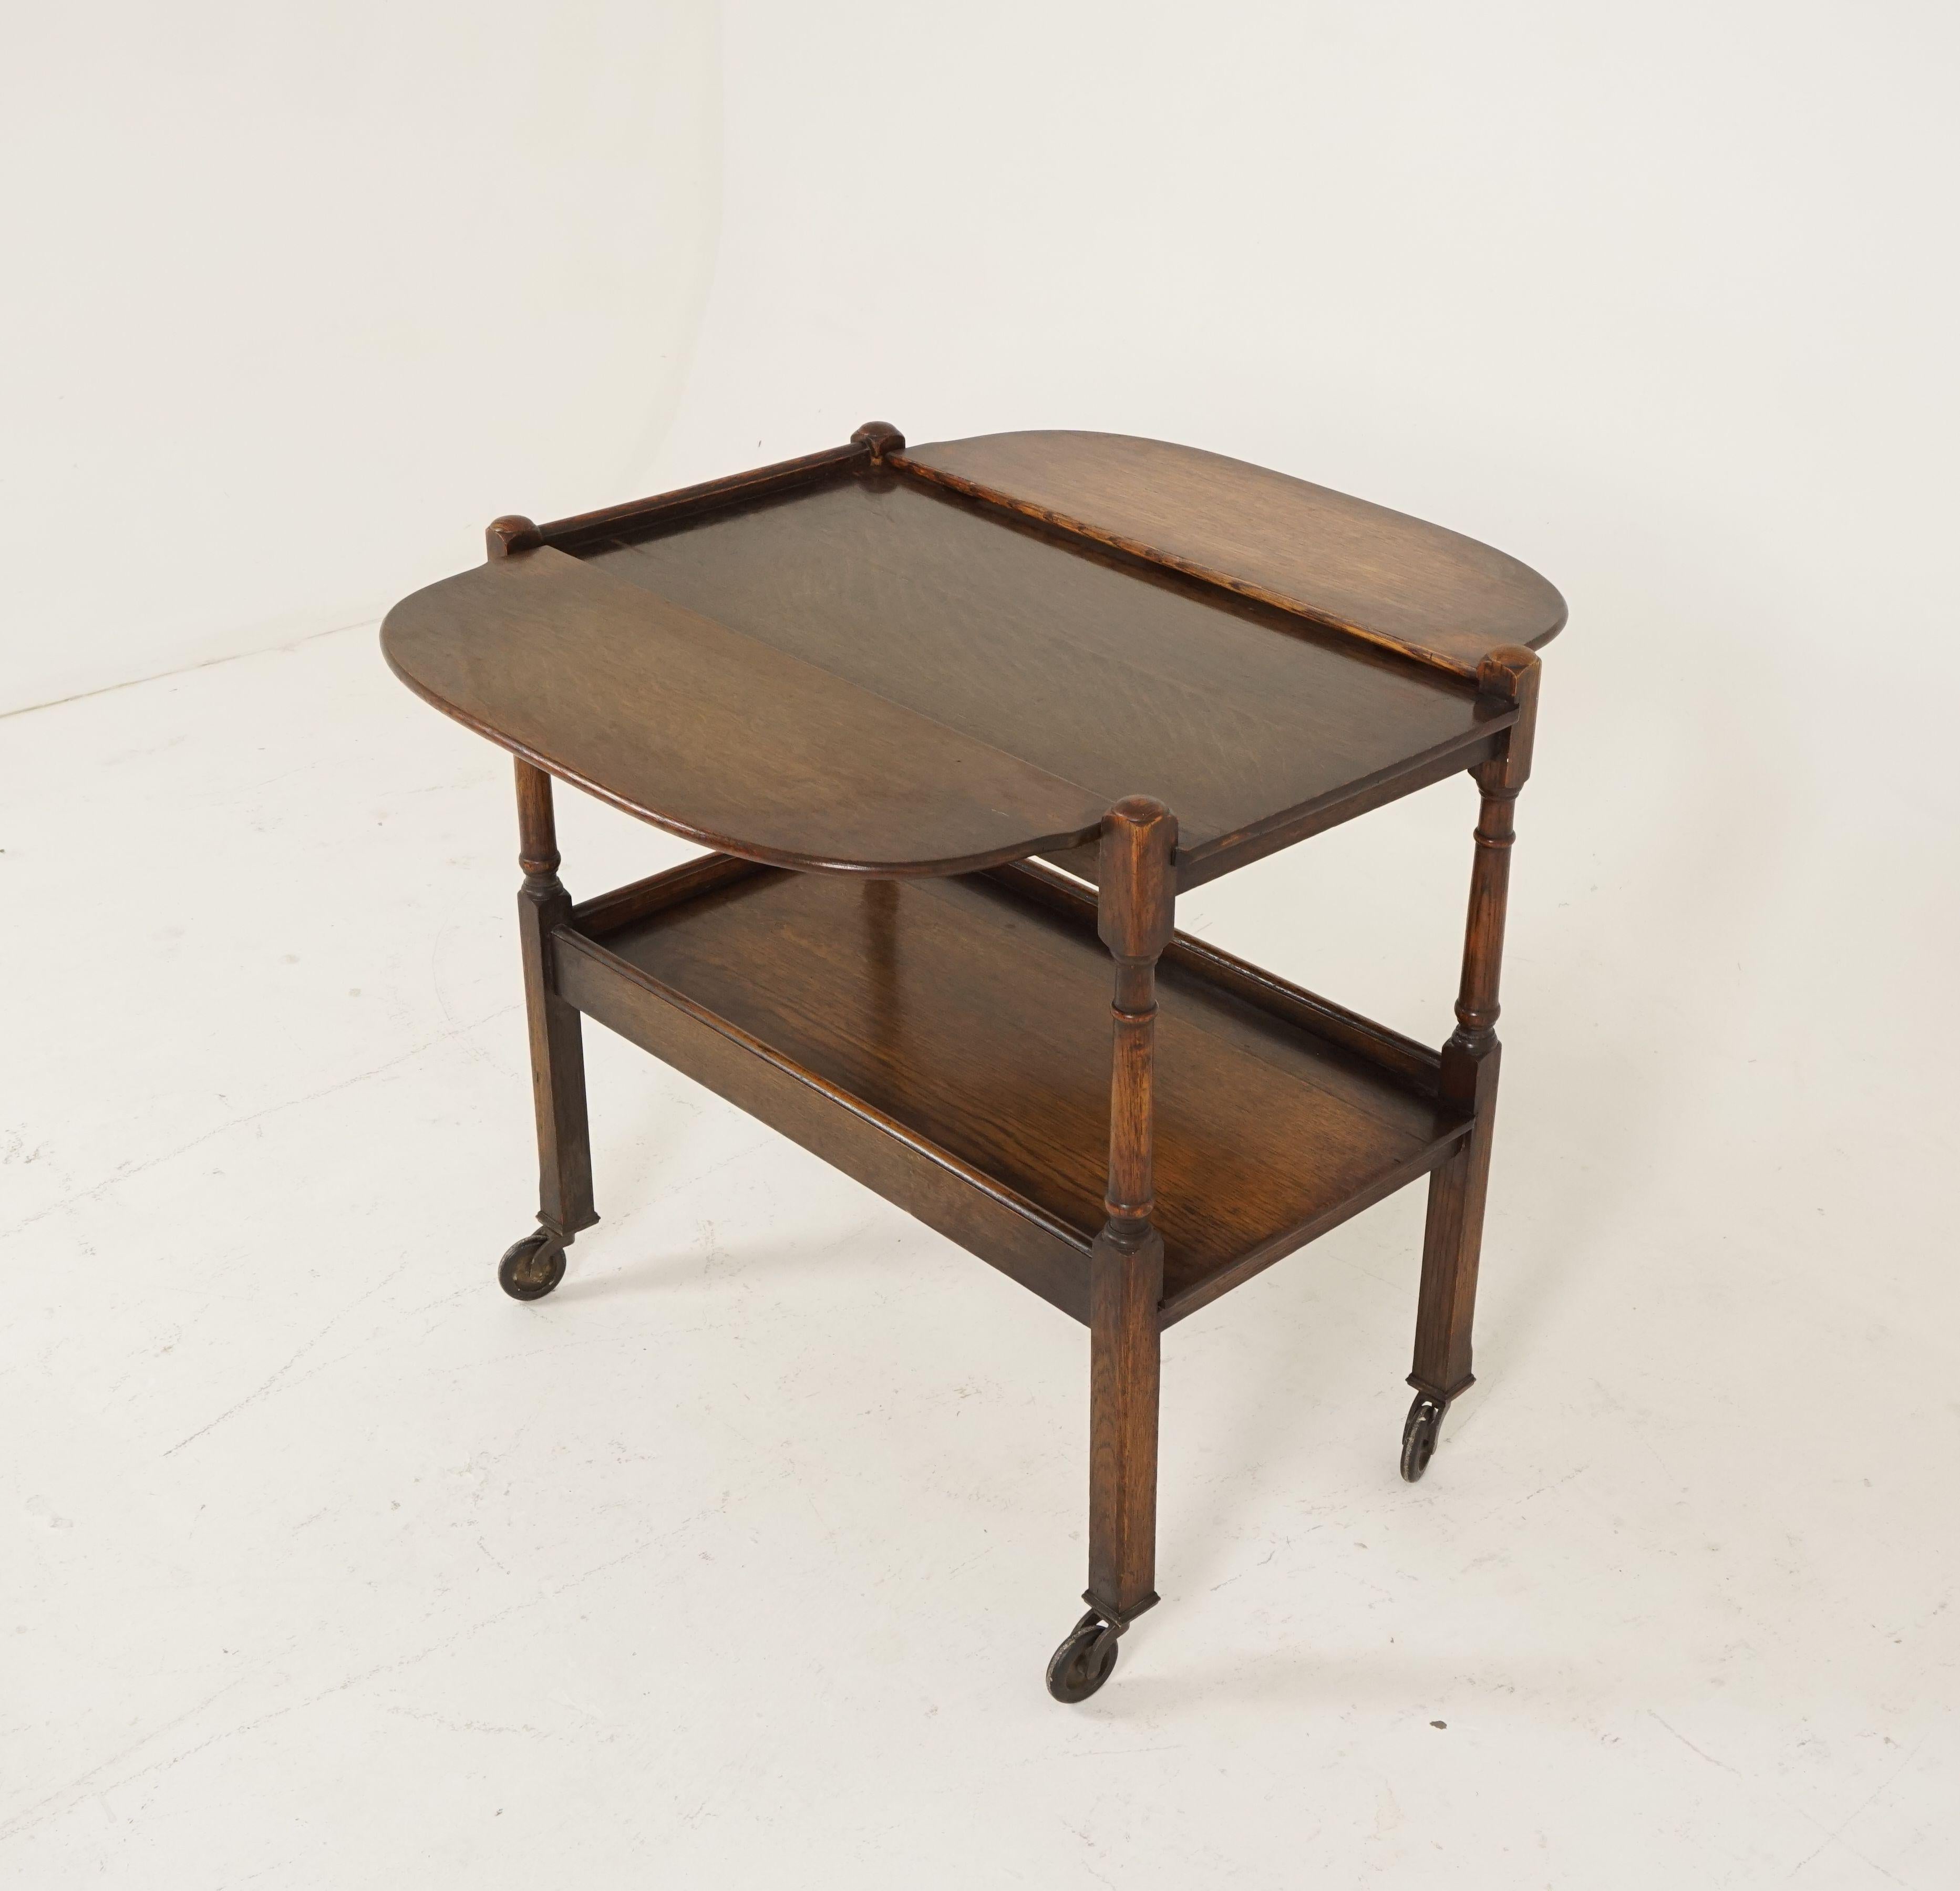 Vintage oak tea trolley, bar cart, two tier, Scotland 1930, B2464

Scotland 1930
Solid oak & veneer
Original finish
Rectangular top with three quarter gallery on top
Pair of leaves on the side that can be raised to provide additional serving